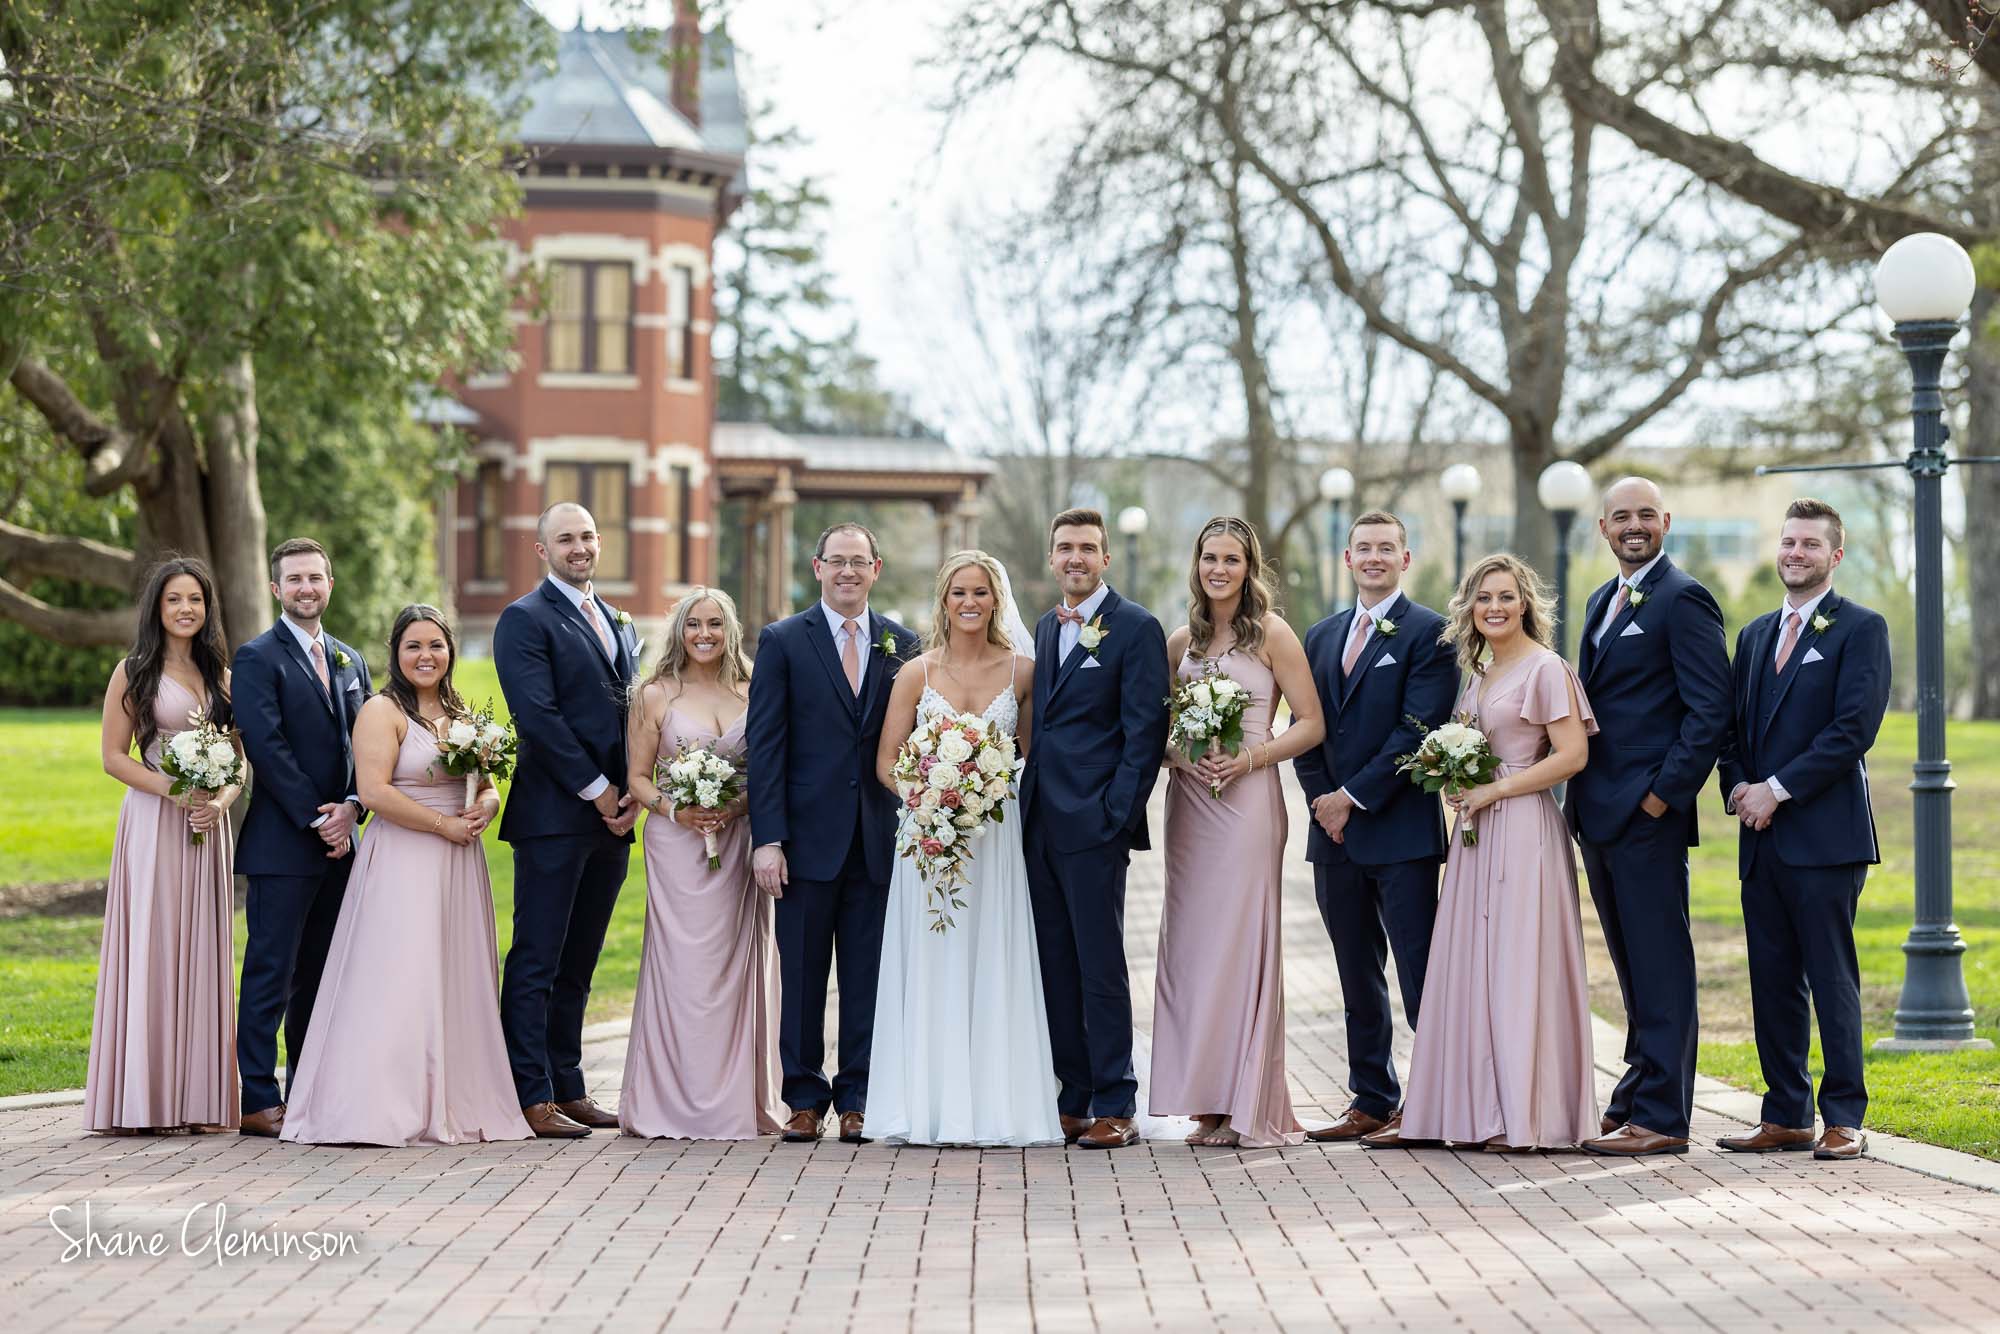 Bridal Party at Naper Settlement in Naperville IL.